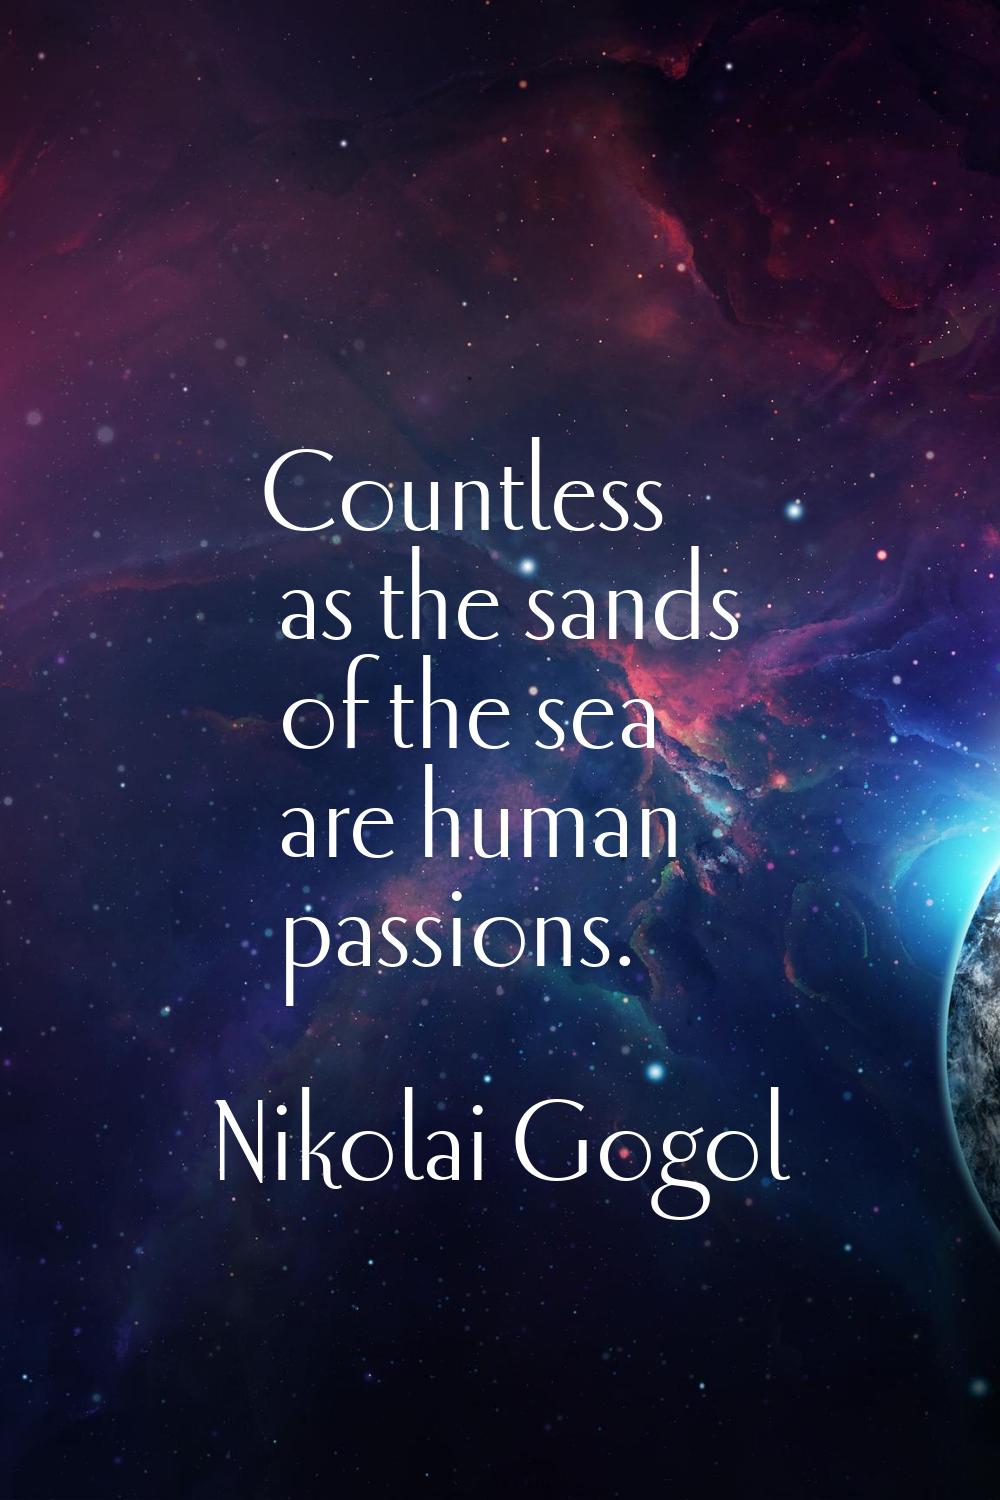 Countless as the sands of the sea are human passions.